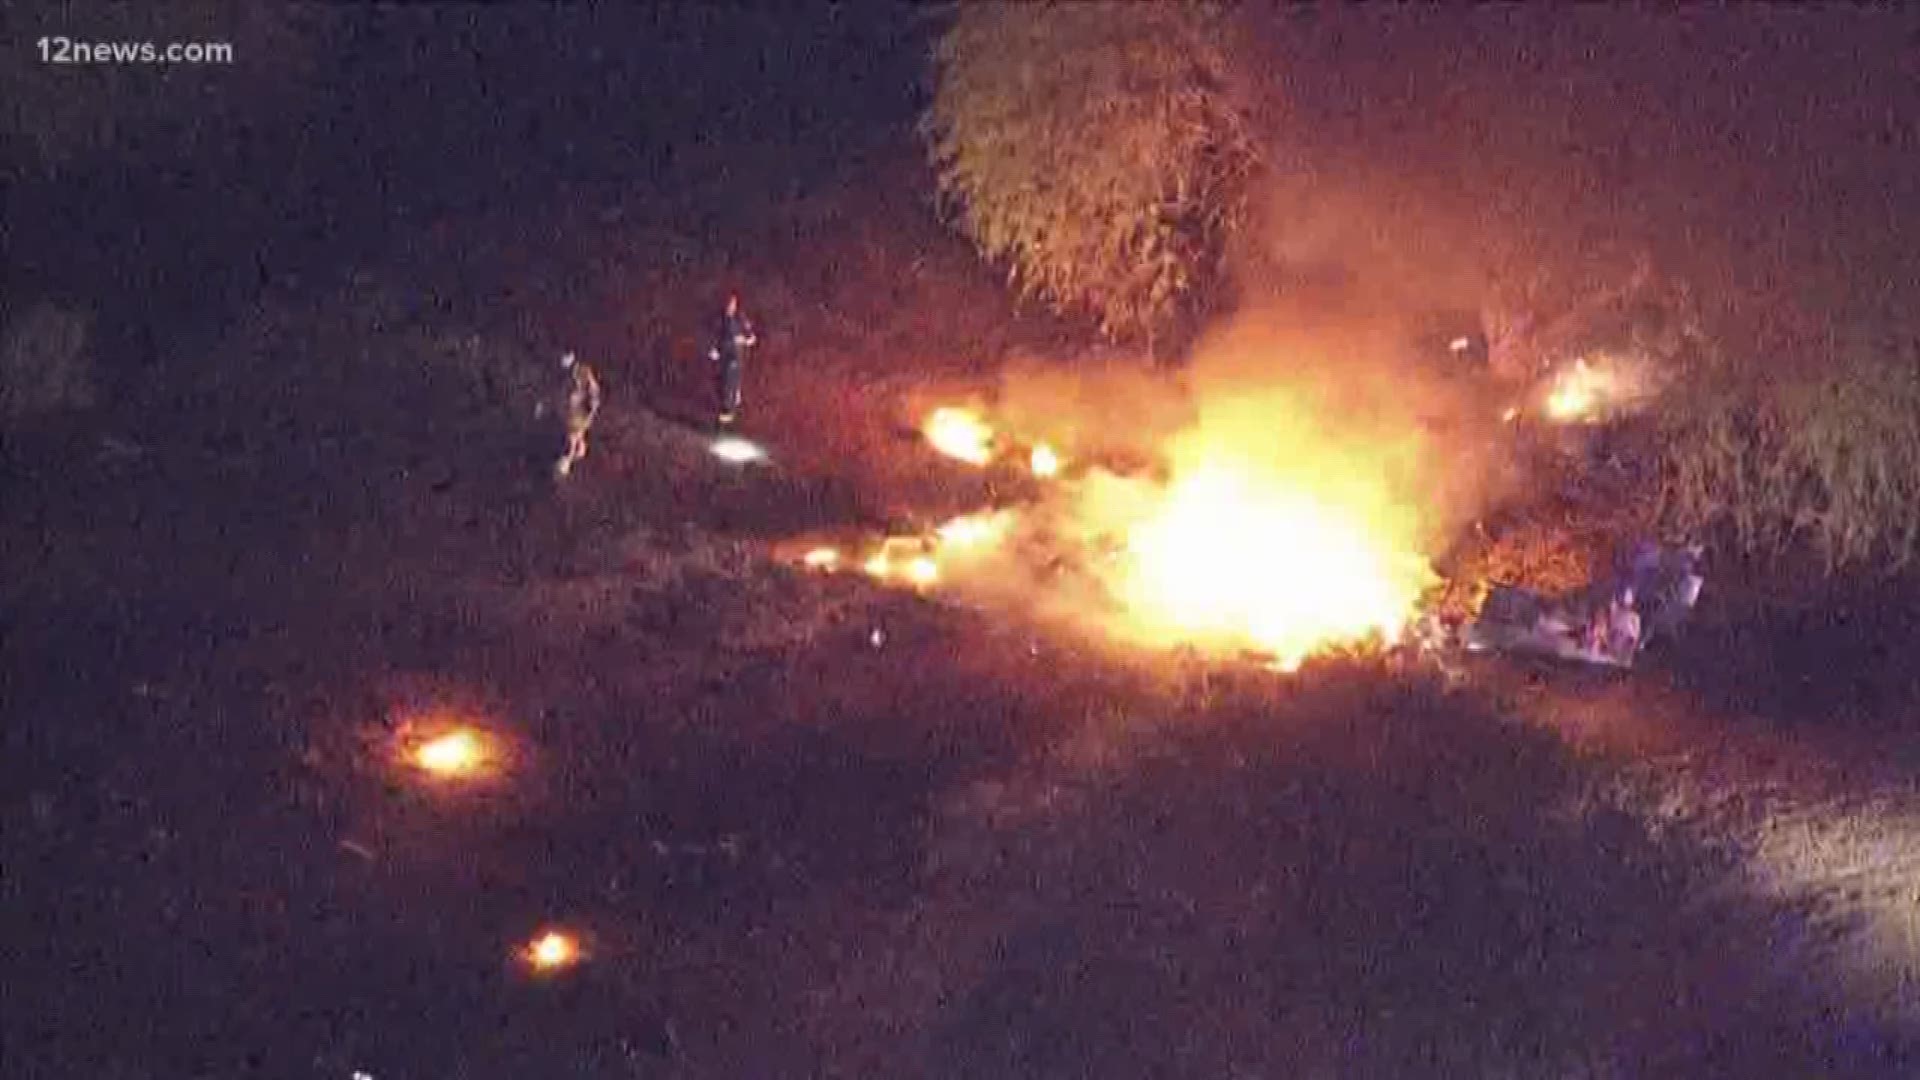 We asked an aviation expert to take a look at traffic cam video of a fiery private plane crash in Scottsdale that killed six people last month. 